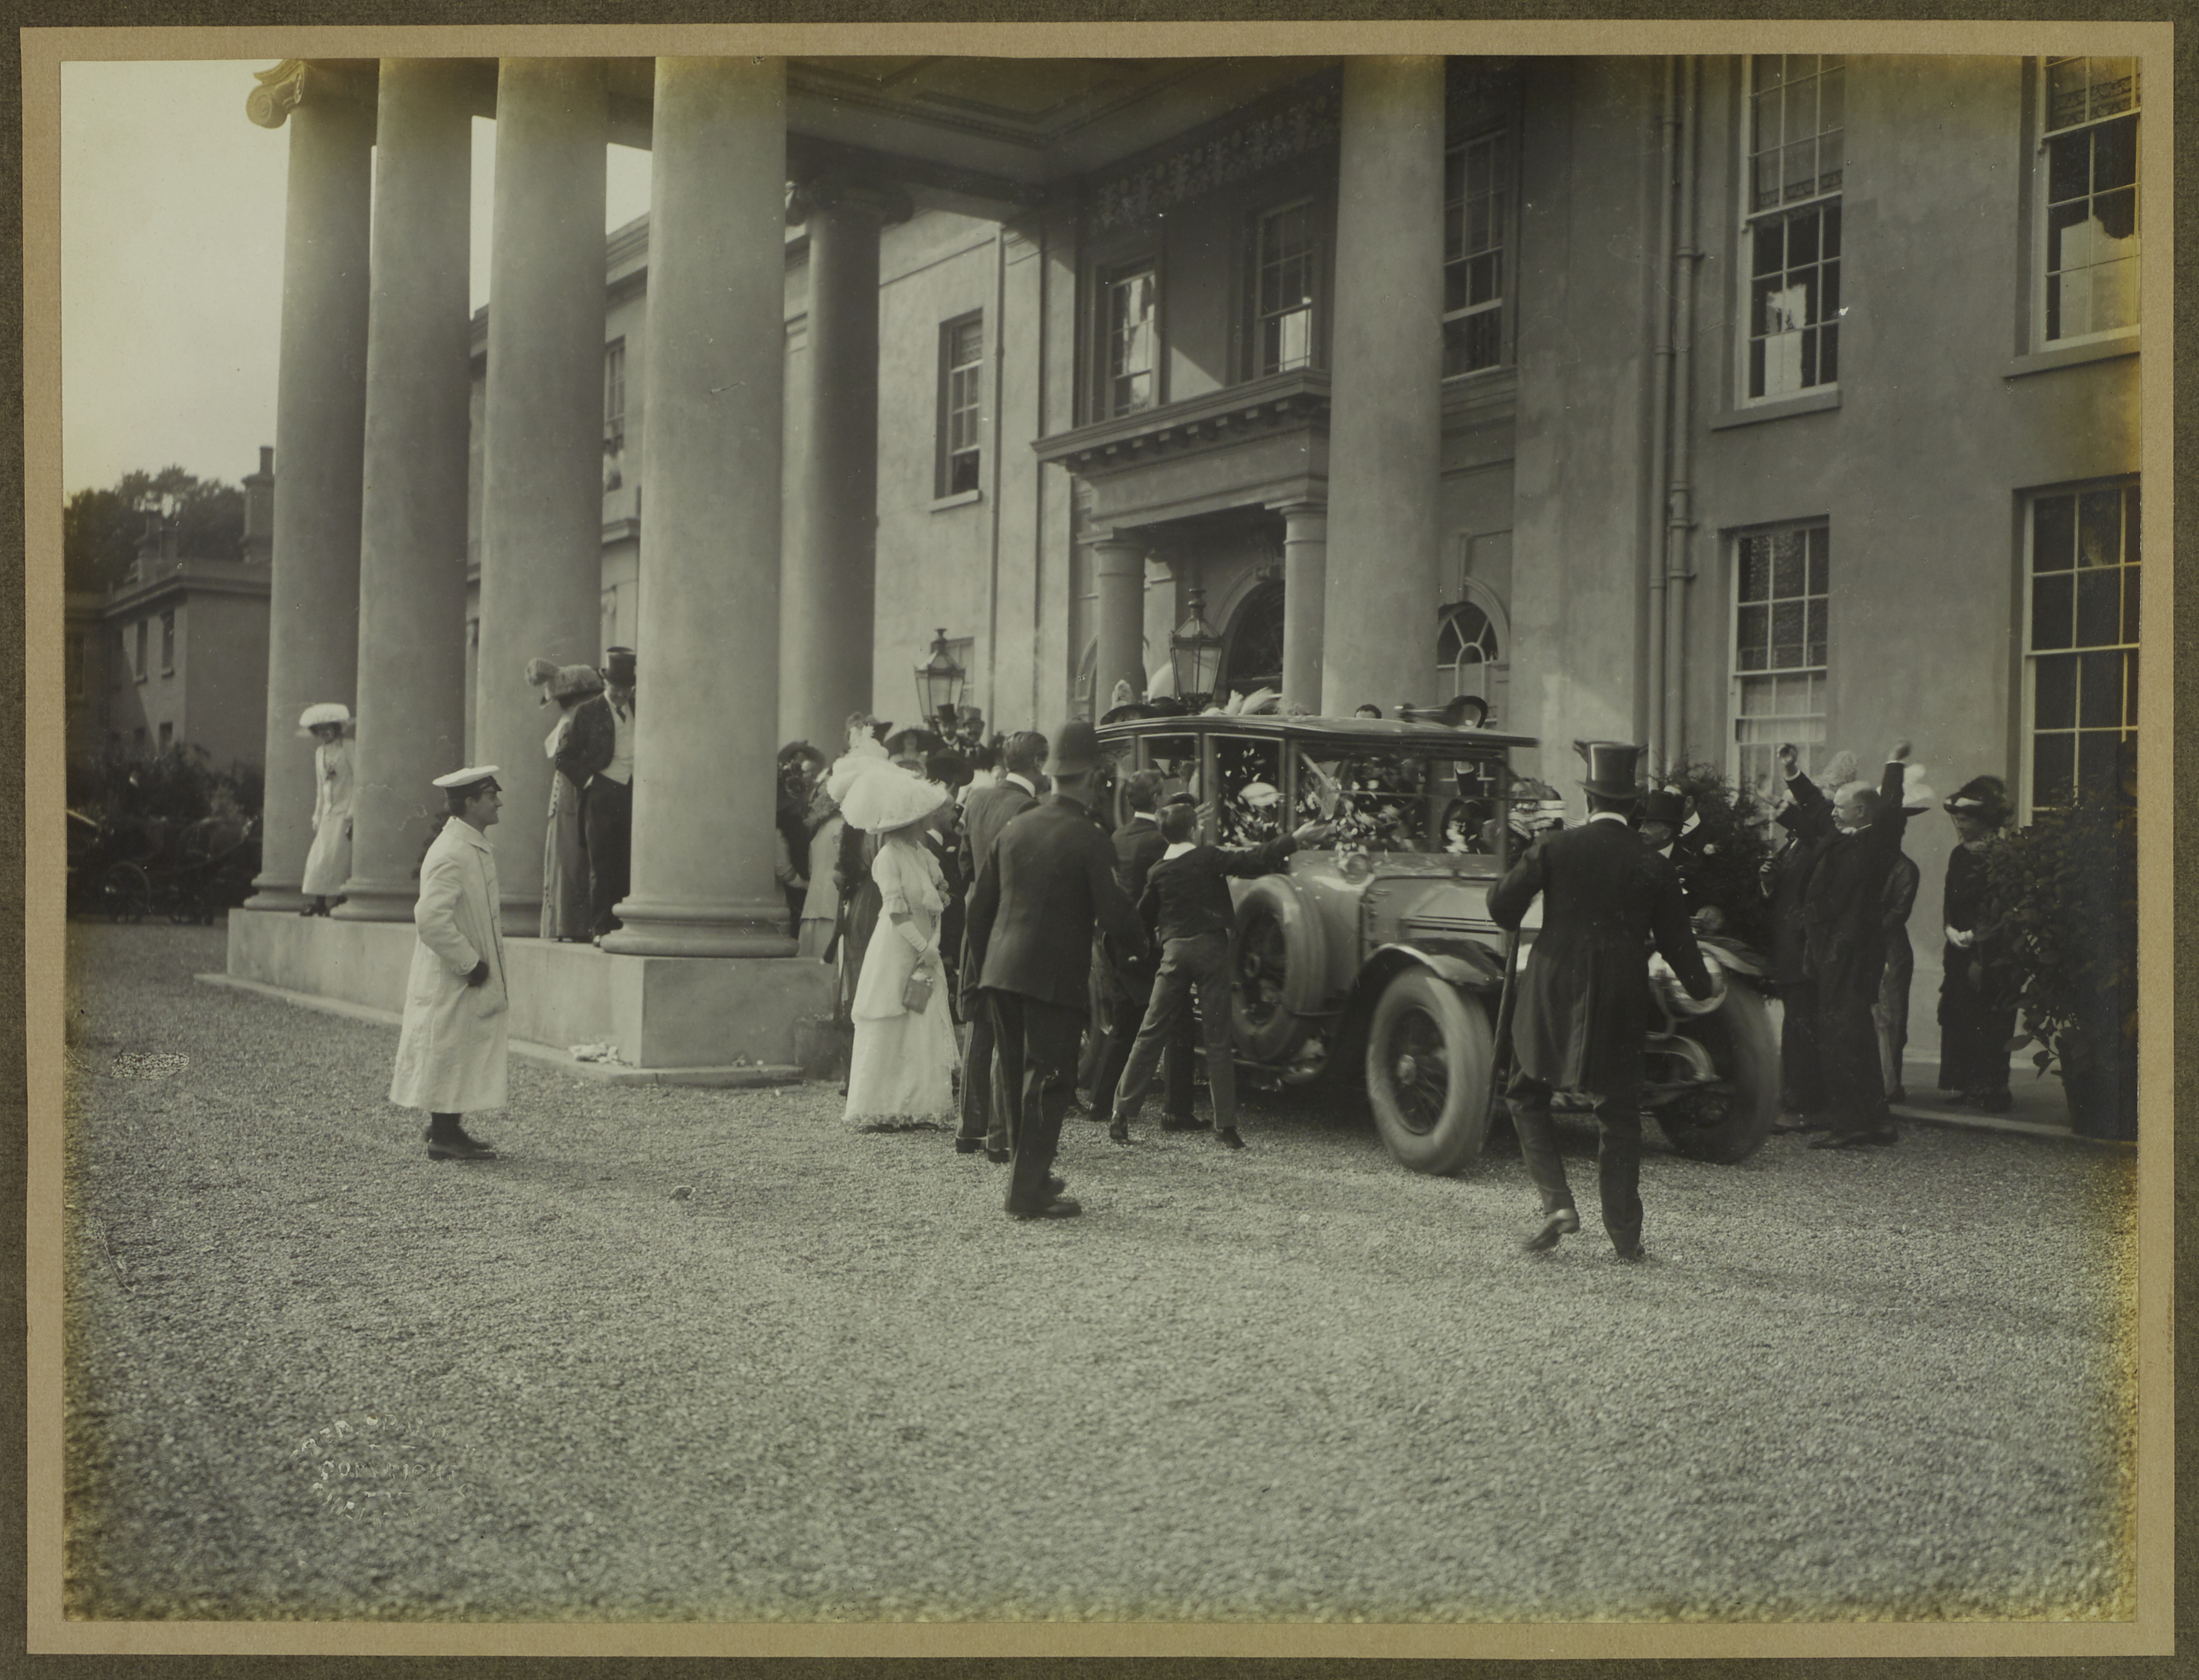 Black and white photograph of the bride and groom leaving by car surrounded by wedding party throwing confetti